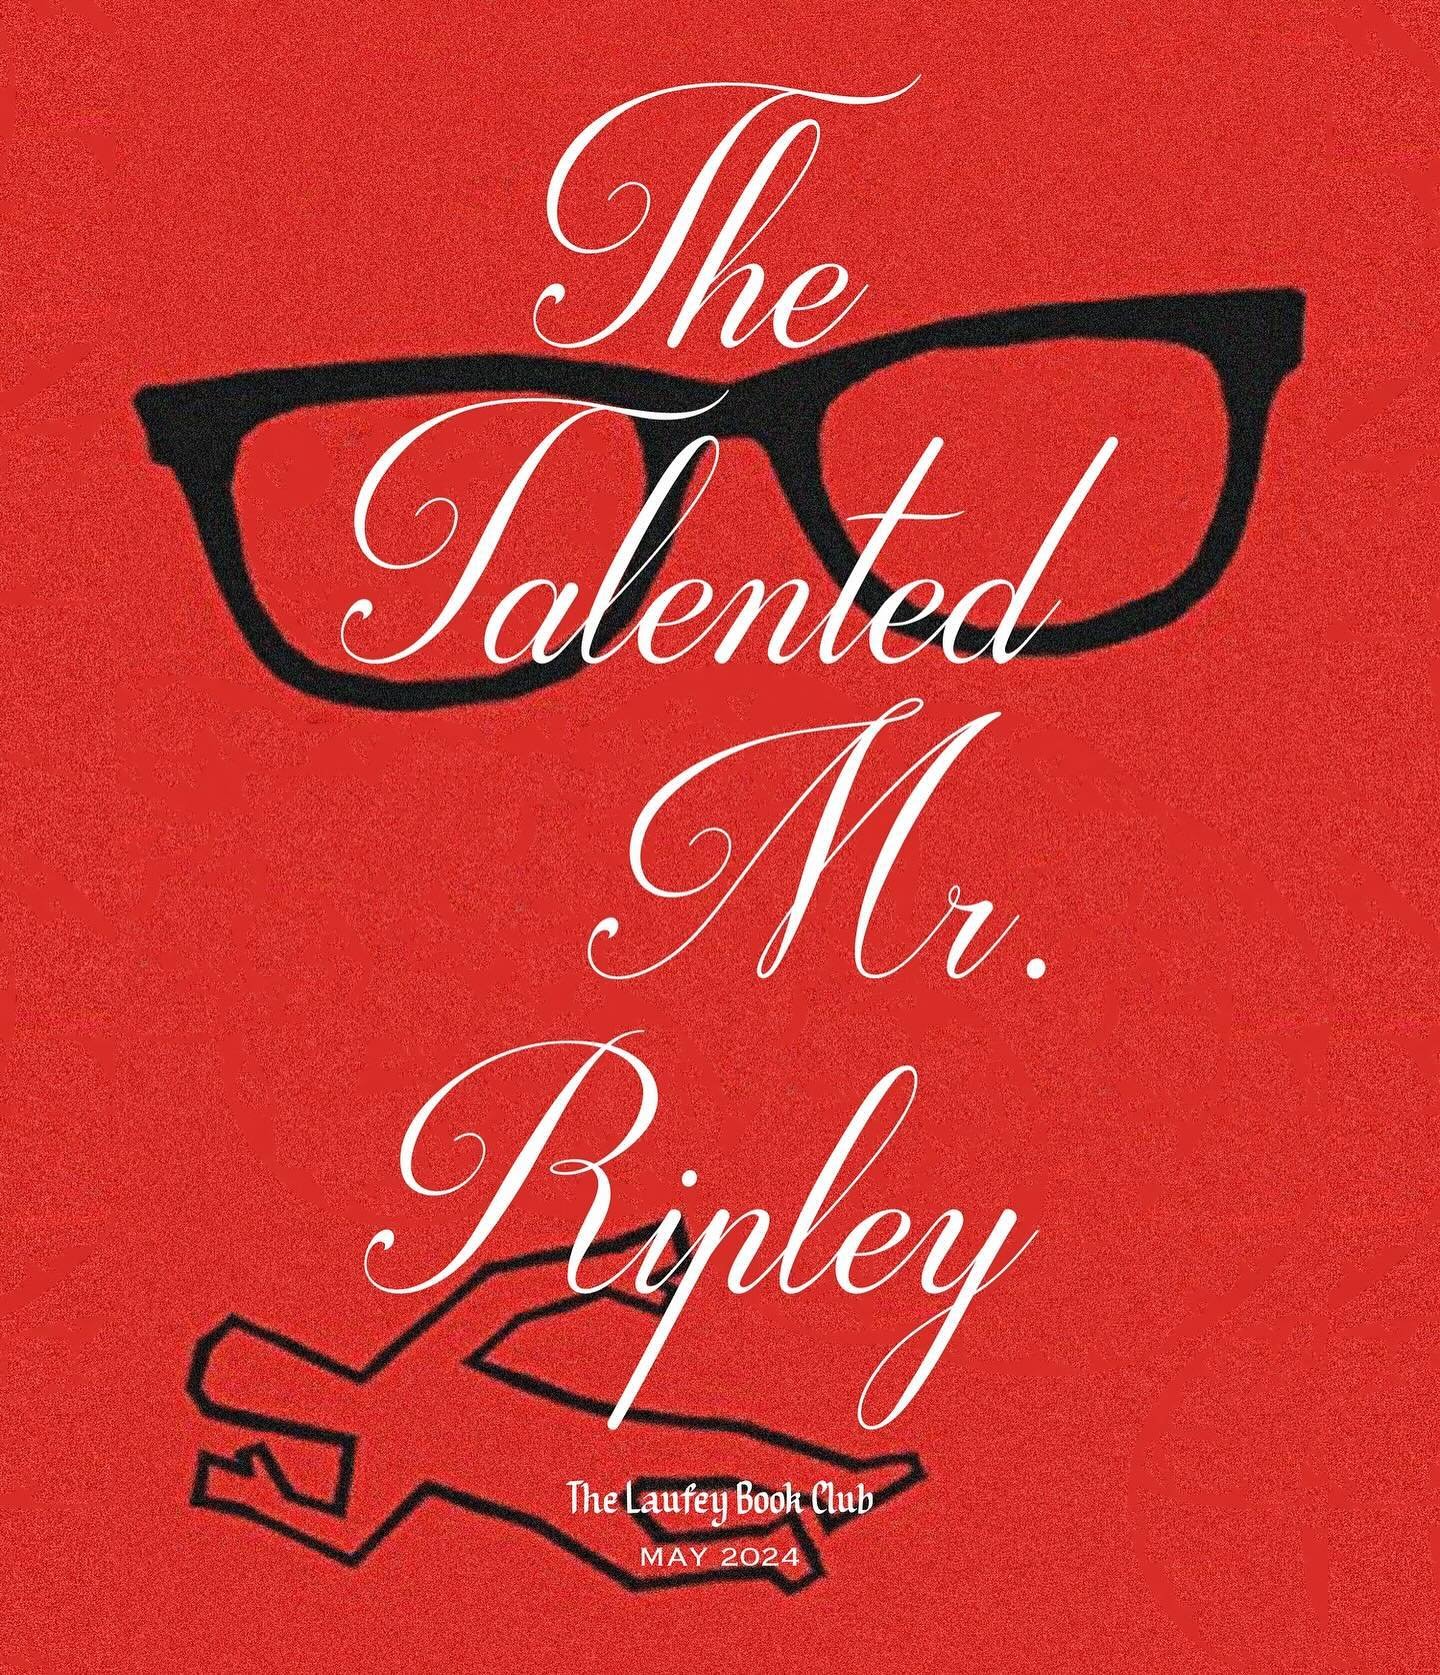 May book announce 🤍 The Talented Mr. Ripley is the most beautiful thriller I&rsquo;ve read. The Italian landscapes and attractive characters come to life off the page &mdash; it&rsquo;s the type of imagery that you&rsquo;d expect from a romantic nov